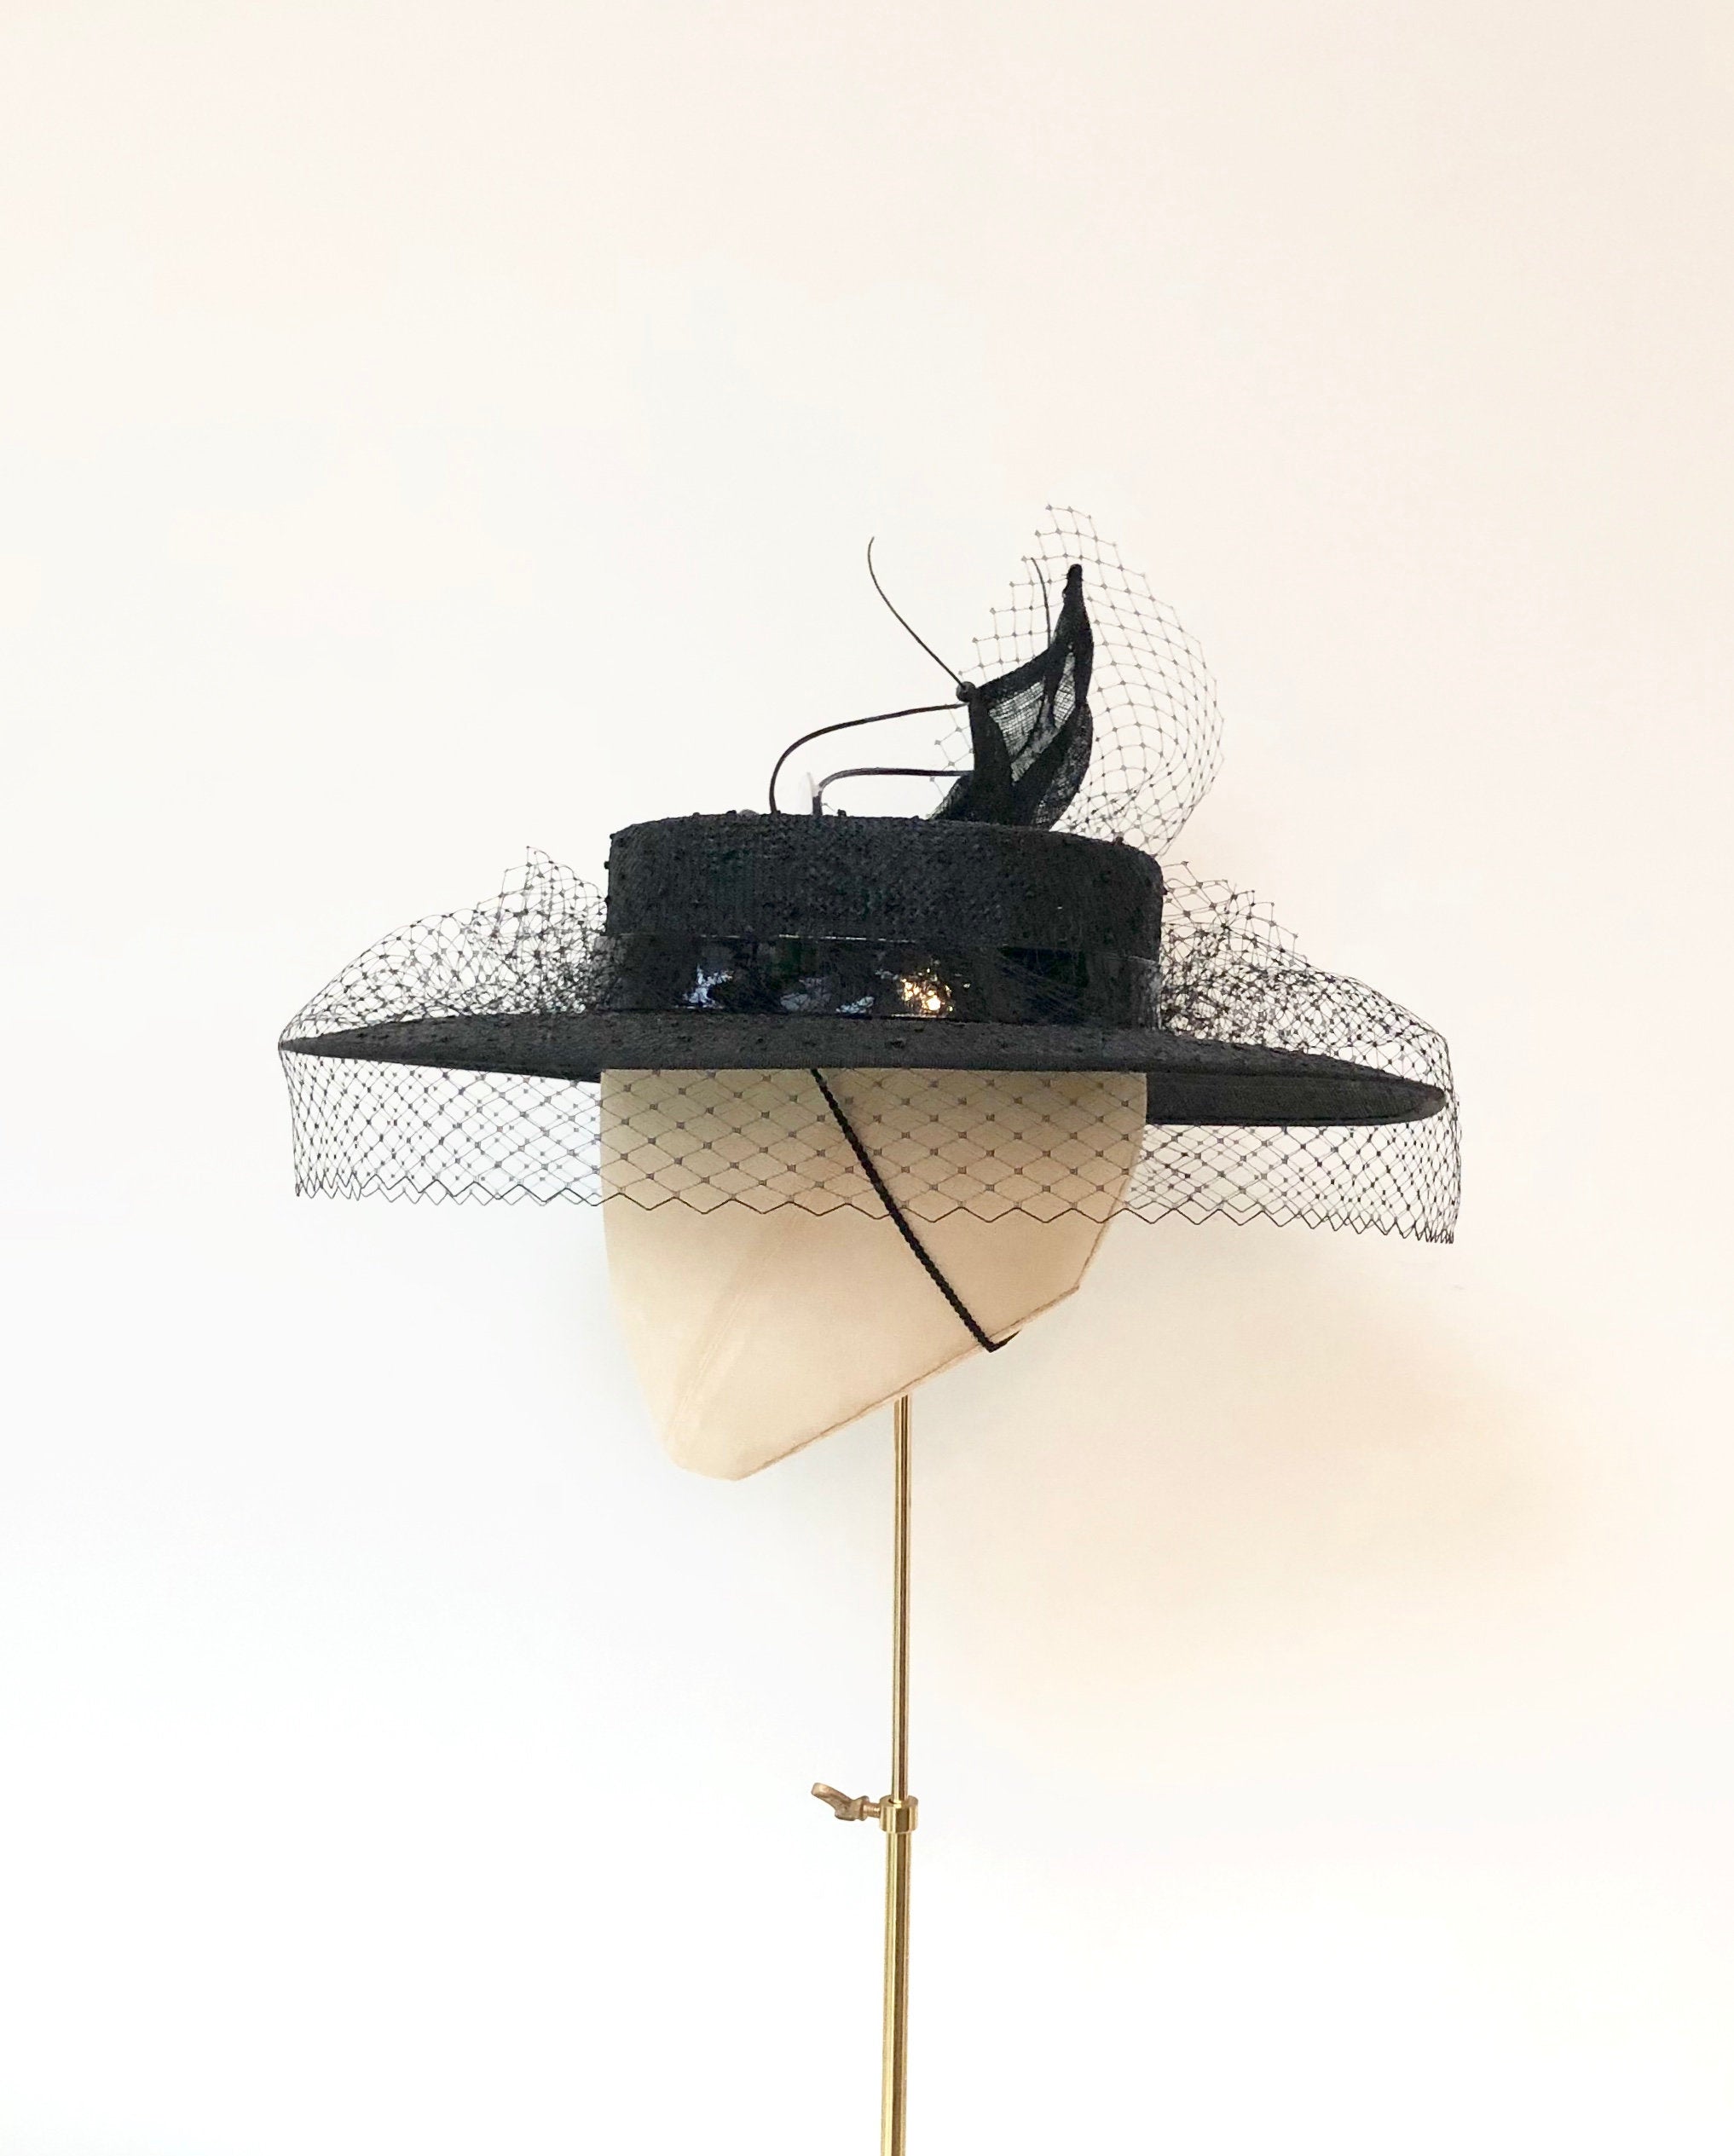 black knotted straw wide boater hat for ladies, royal ascot races, with white silk flower starw sinamy twist, black quills and black veiling